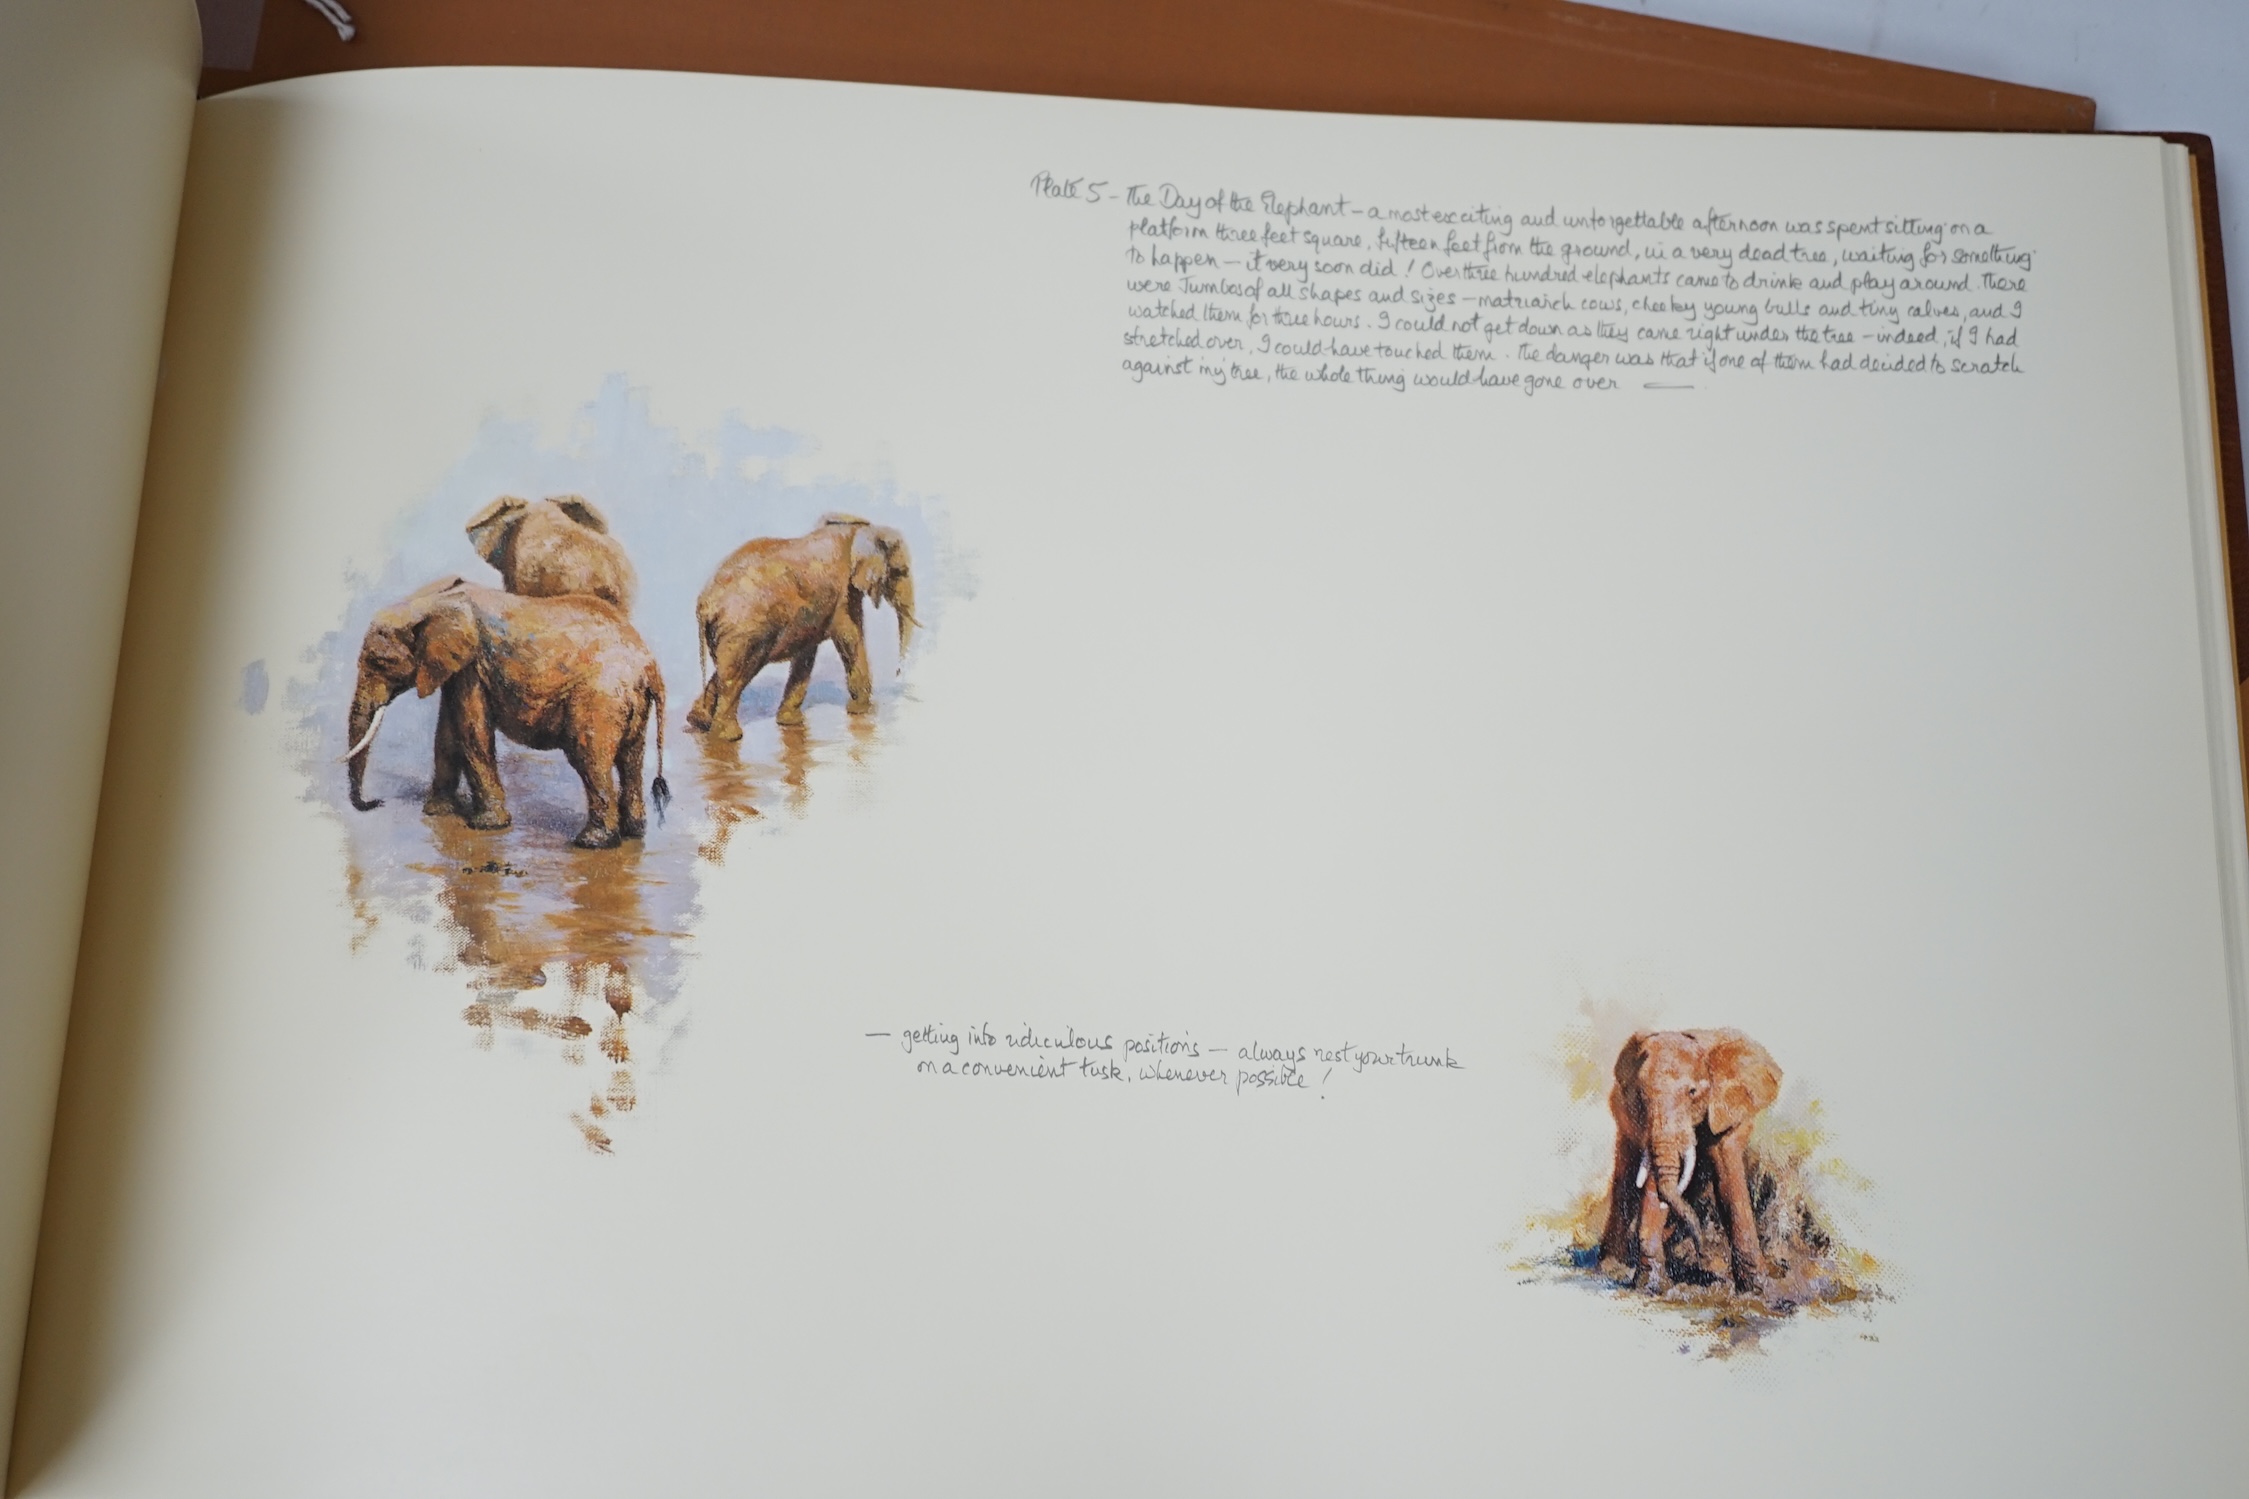 A folio of D. Shepherd signed prints of paintings of Africa and India